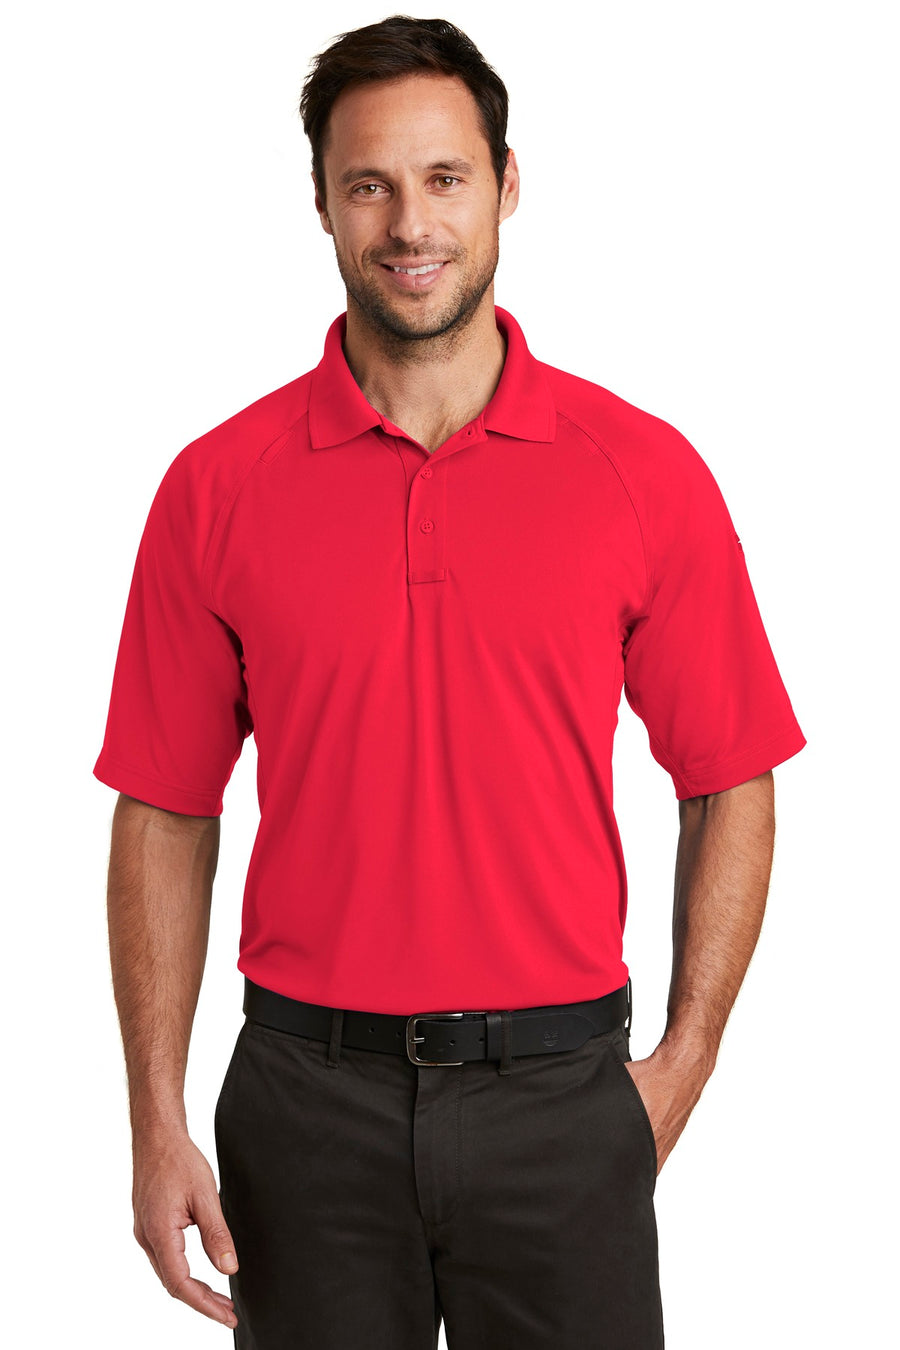 CornerStone Select Lightweight Snag-Proof Tactical Polo.